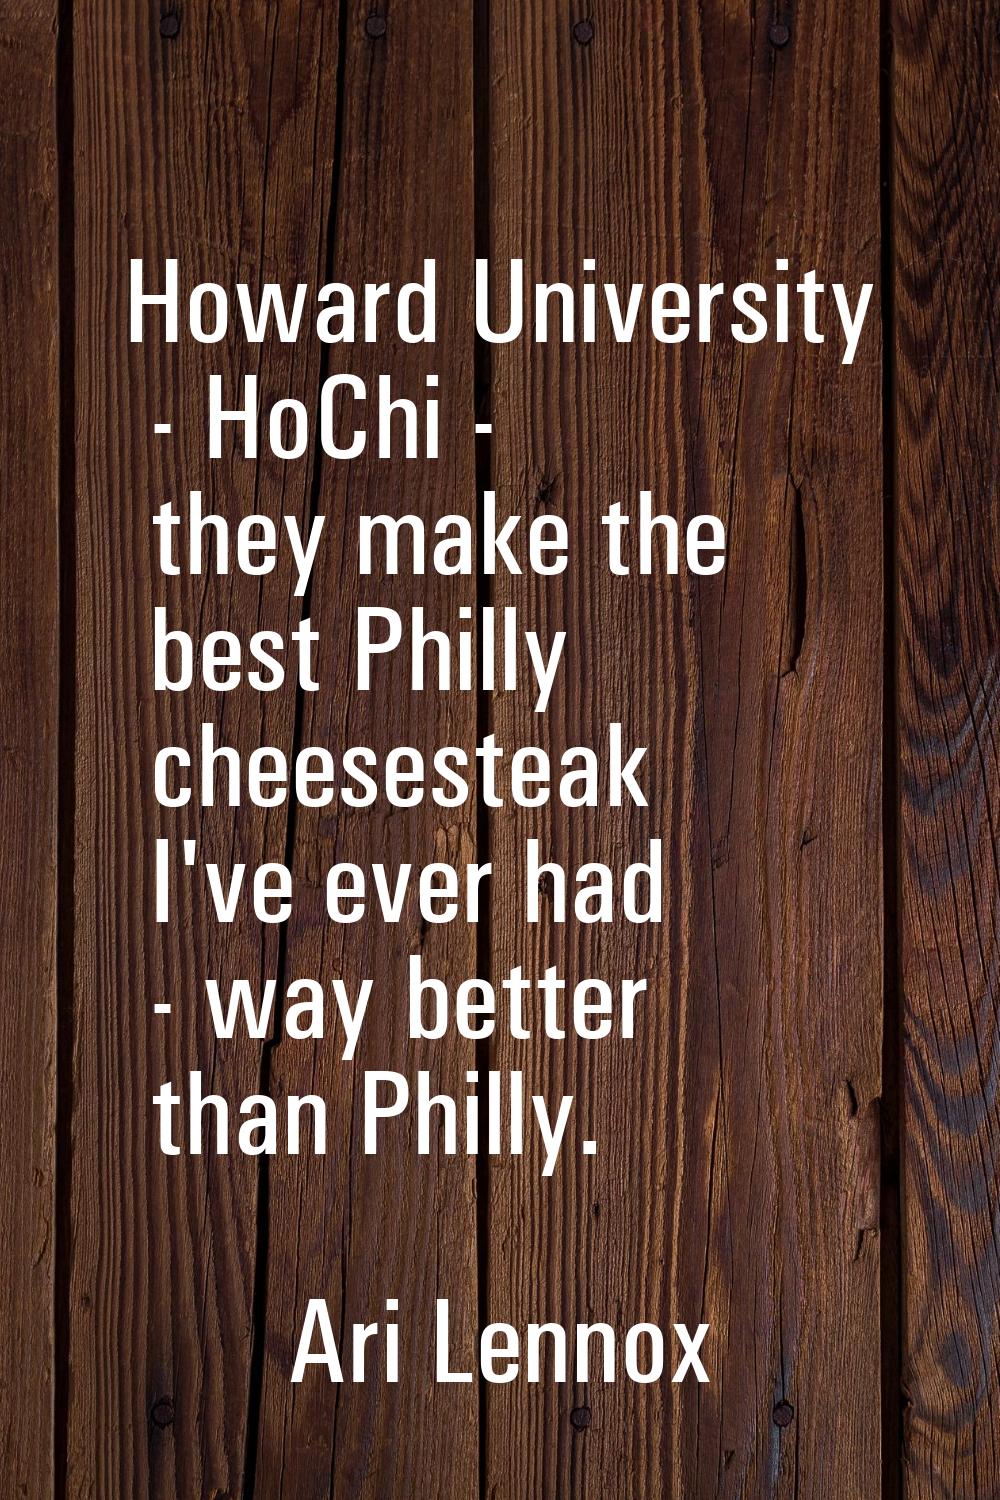 Howard University - HoChi - they make the best Philly cheesesteak I've ever had - way better than P